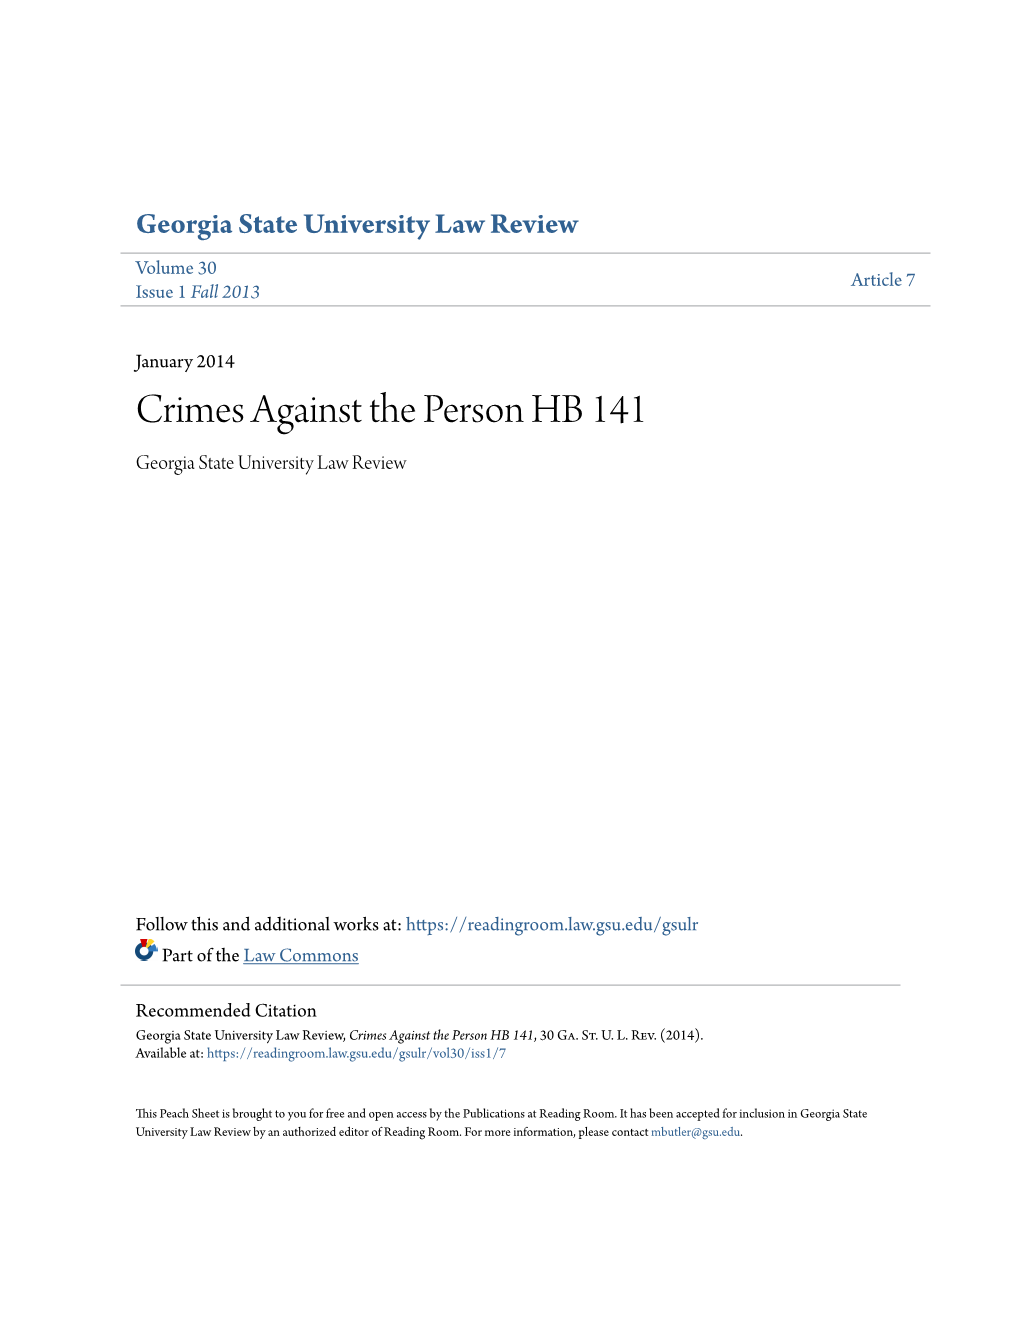 Crimes Against the Person HB 141 Georgia State University Law Review